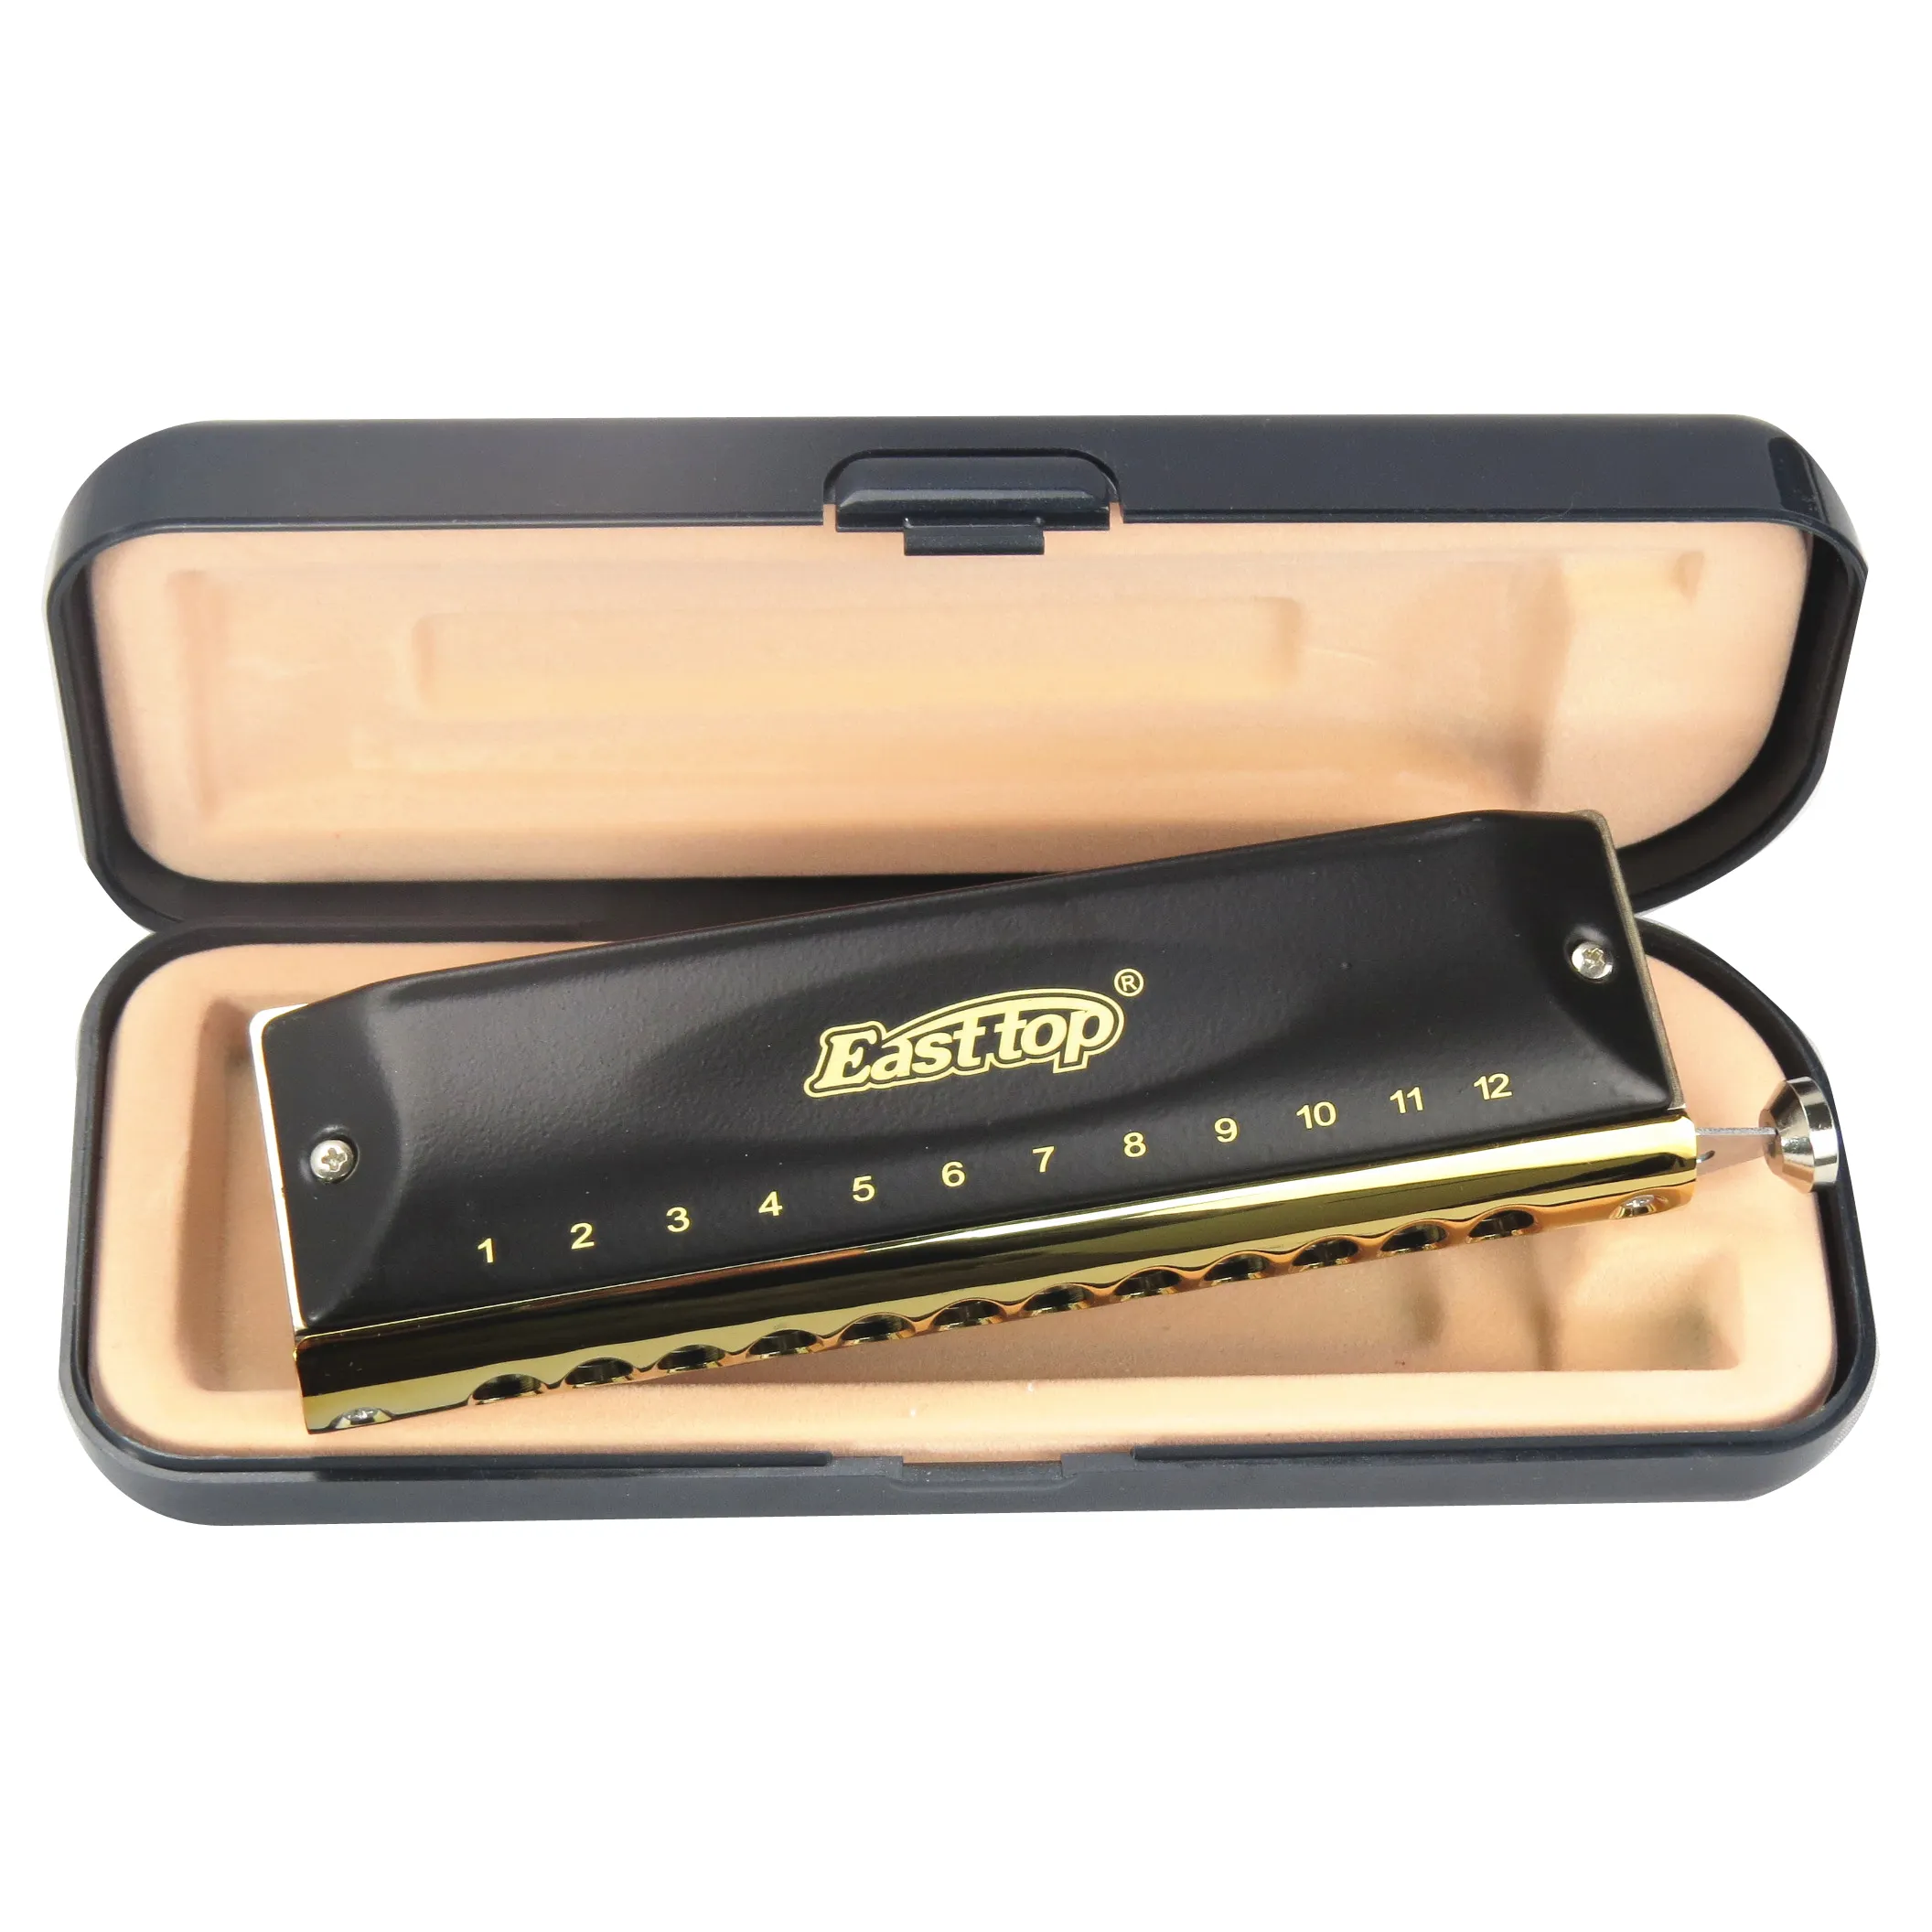 Factory hot sale chromatic harmonicas for harmonica musical instrument easttop